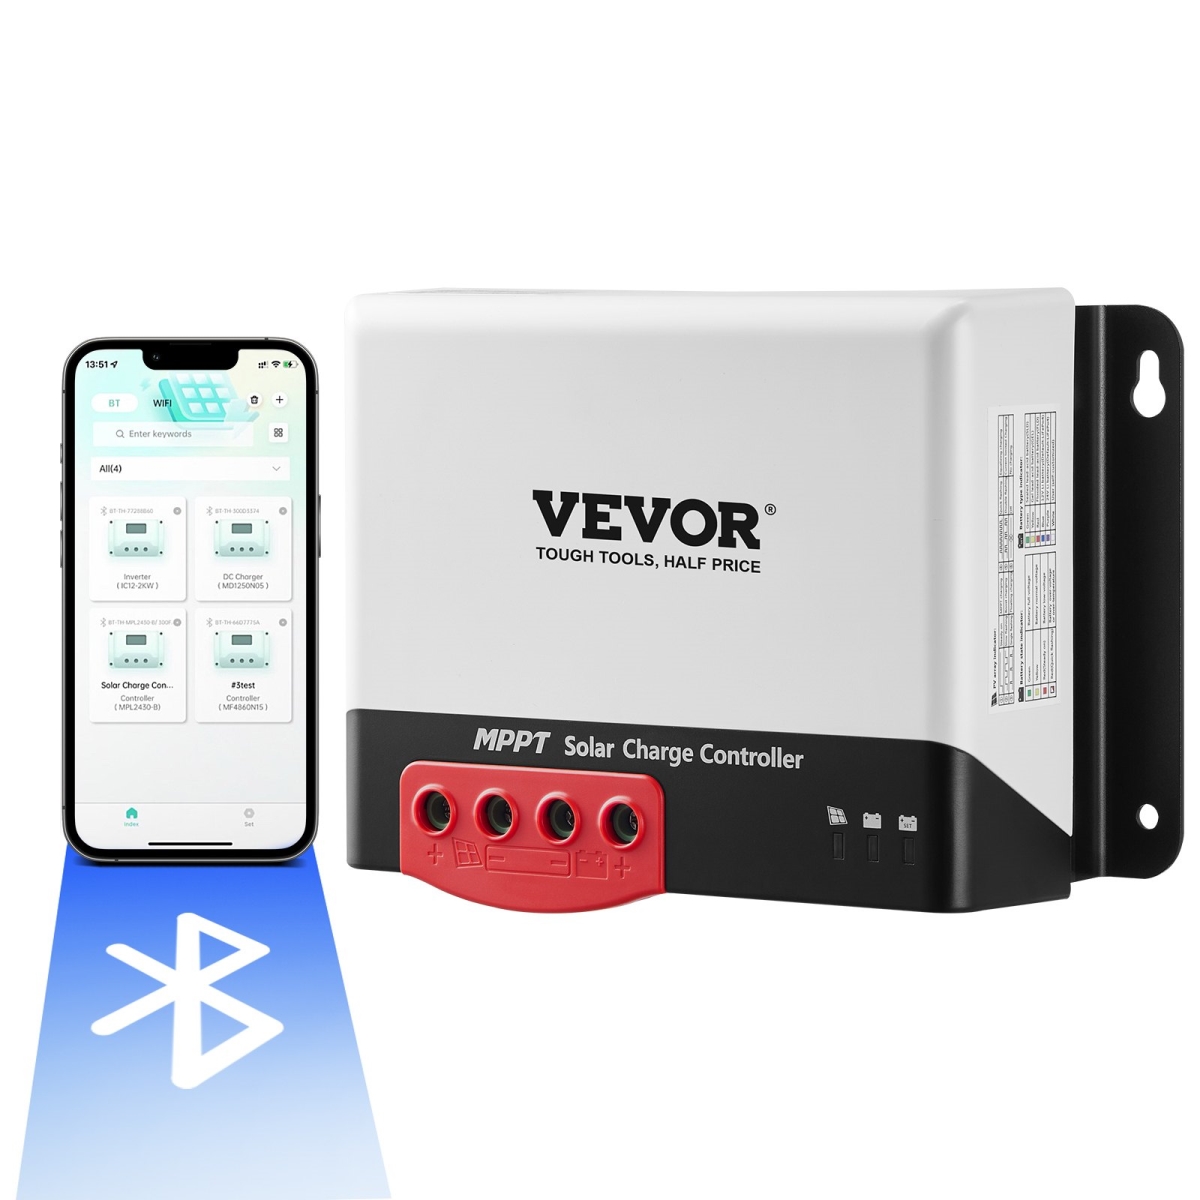 Picture of Vevor DYTYNCDKZQNZLQFLPV9 12V & 24V 30A MPPT Solar Charge Controller&#44; Auto DC Input&#44; Solar Panel Regulator Charger with Bluetooth Module